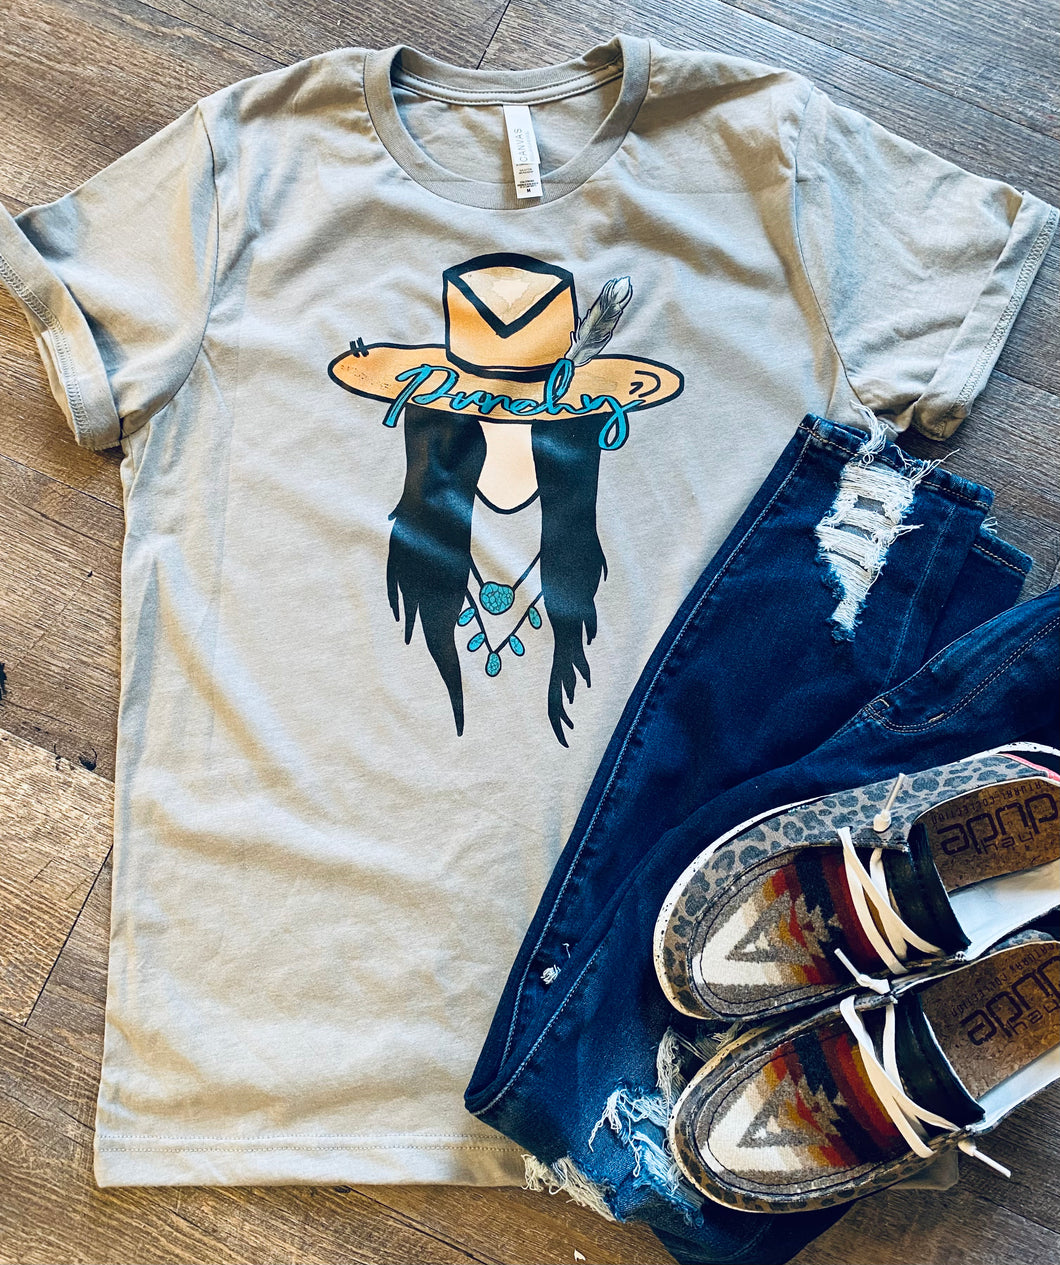 Punchy Cowgirl. Turquoise. Western. Graphic tee. - Mavictoria Designs Hot Press Express